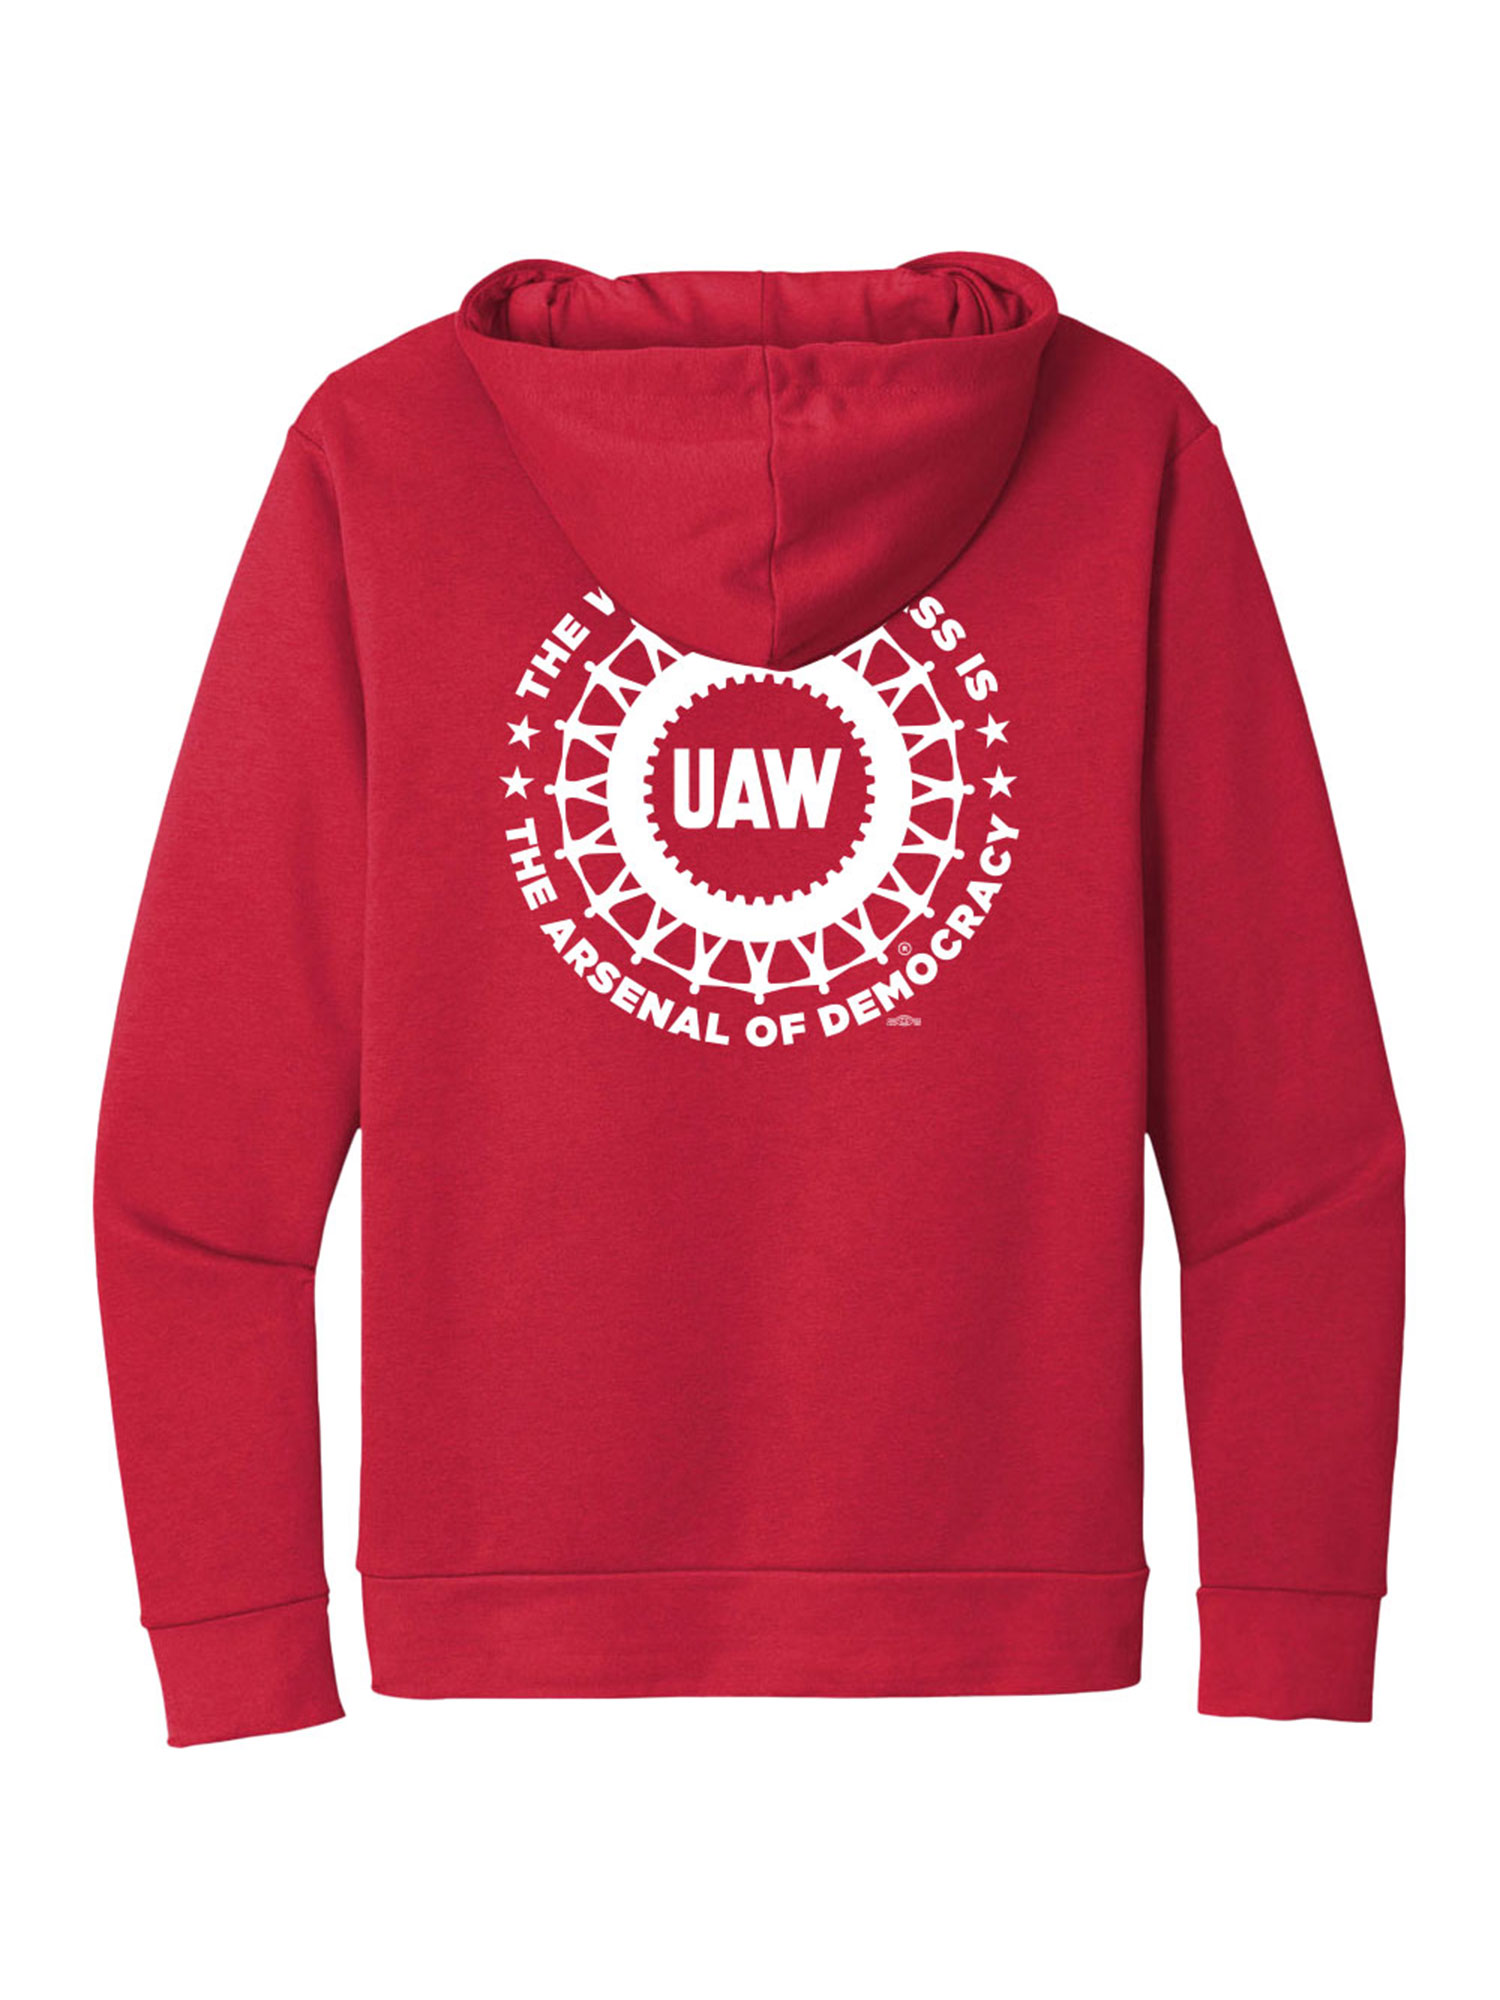 Hooded Pullover Sweatshirt - Union Made & Decorated - Back